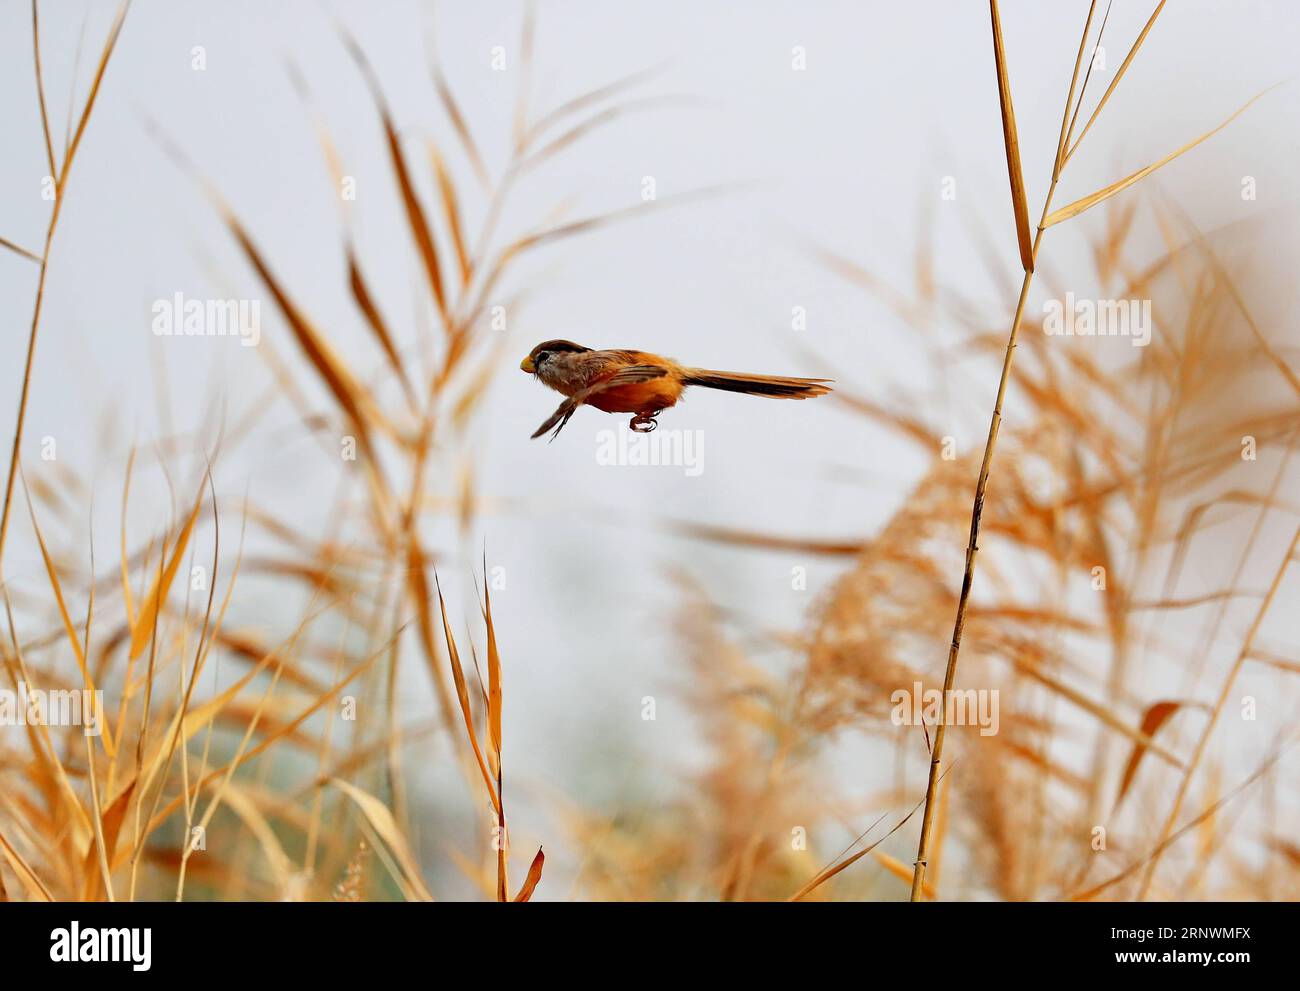 (171225) -- BEIJING, Dec. 25, 2017 -- A reed parrotbill flies in reeds in Wanping Lake of Beijing, capital of China, Nov. 6, 2017. Photos here taken in 2017 by Xinhua contract photographers present a harmony between animals and nature. ) (lx) CHINA-NATURE-ANIMAL (CN) LiuxXianguo PUBLICATIONxNOTxINxCHN Stock Photo